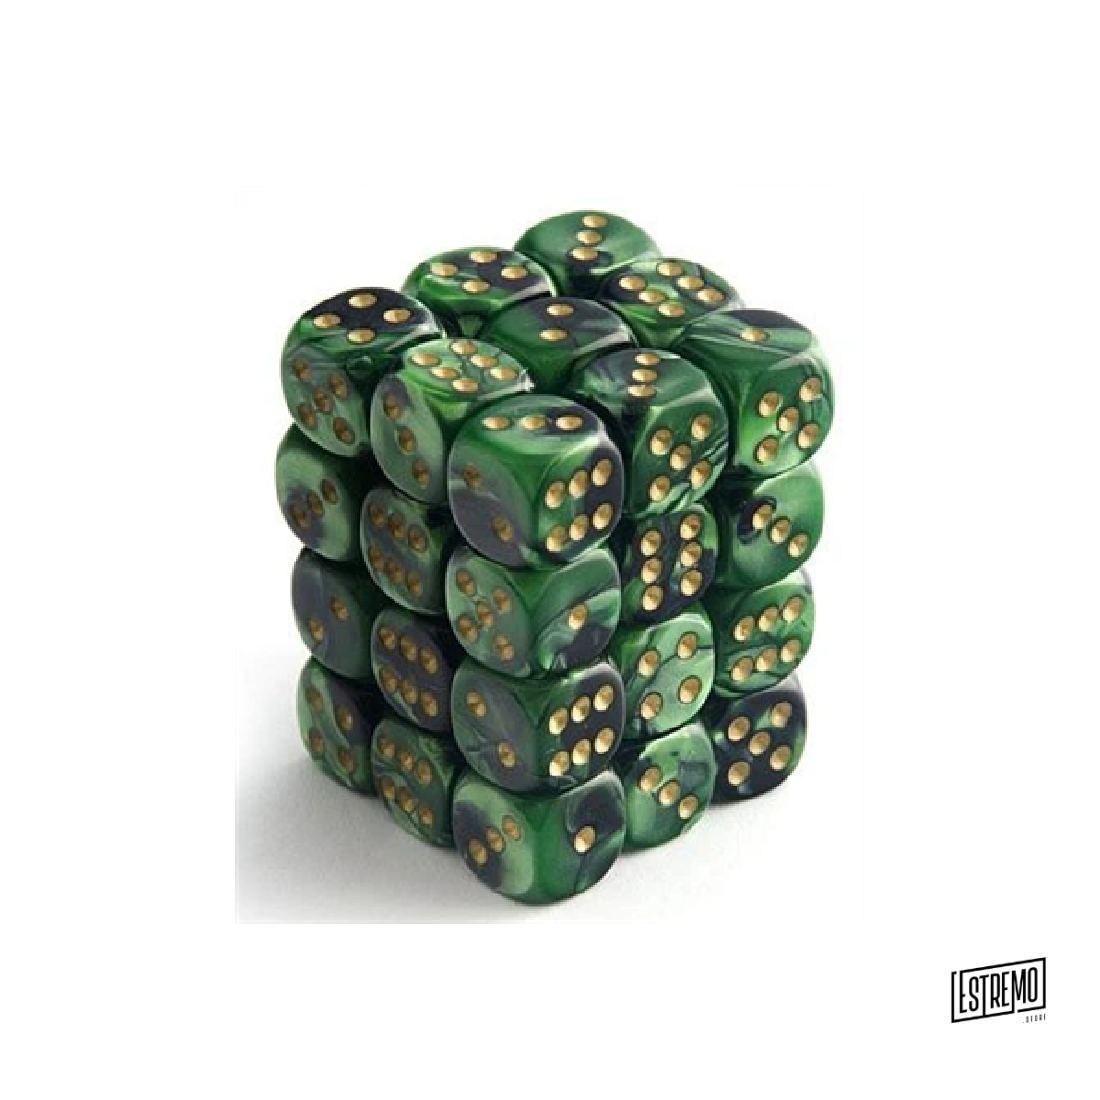 CHESSEX SIGNATURE 12MM D6 WITH PIPS DICE BLOCKS (36 DICE) - SCARAB JADE W/GOLD